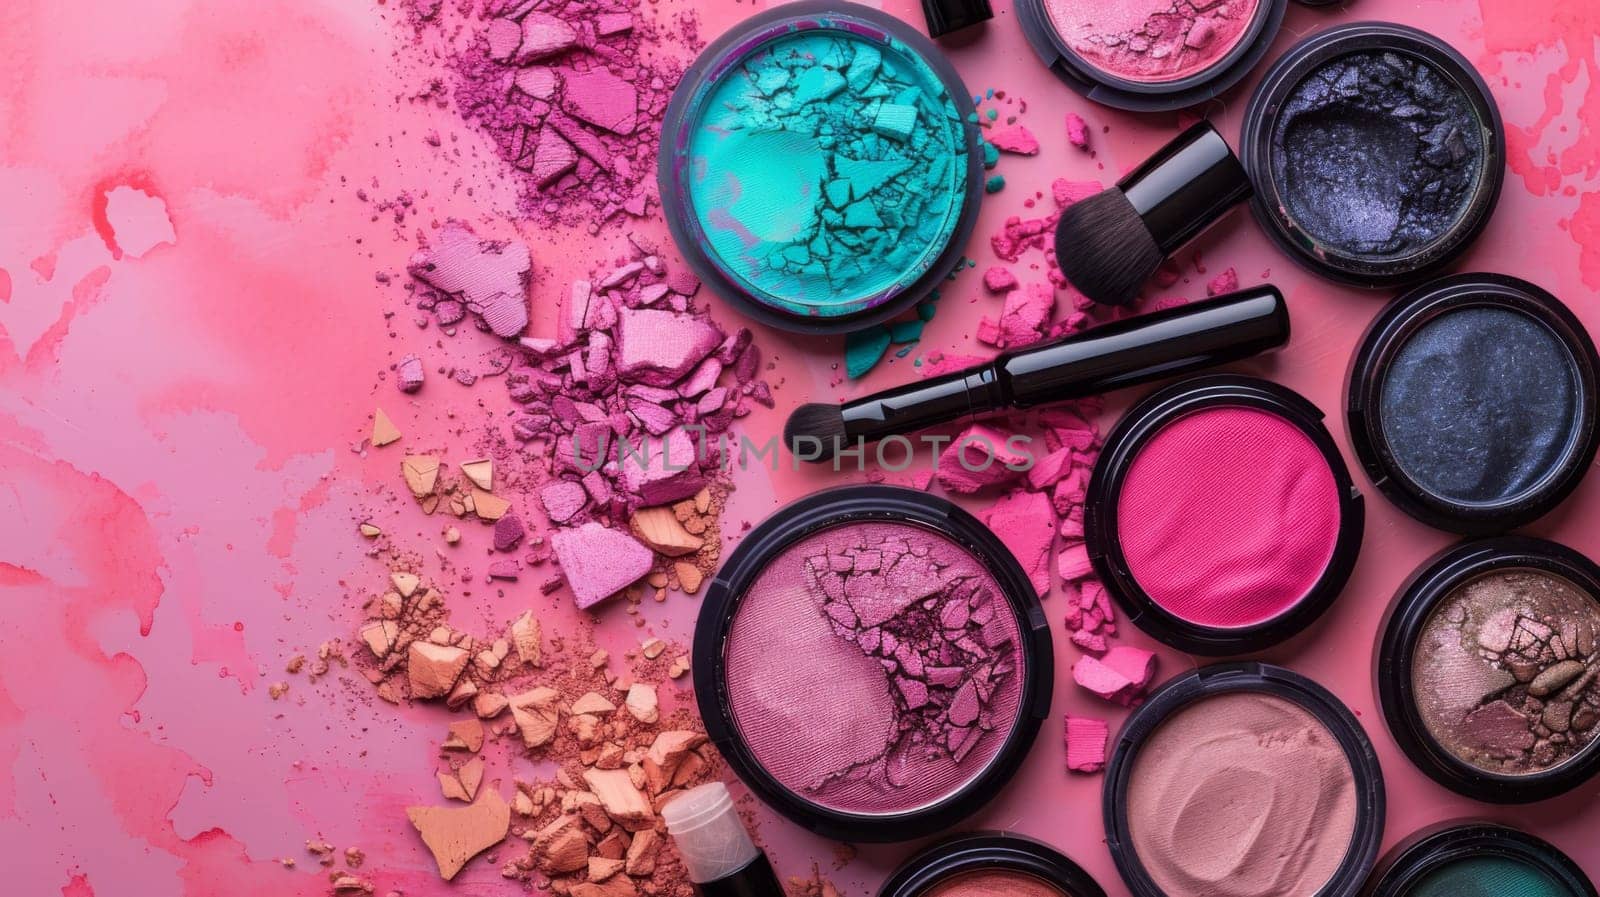 A bunch of different colored eyeshadows and brushes on a pink background